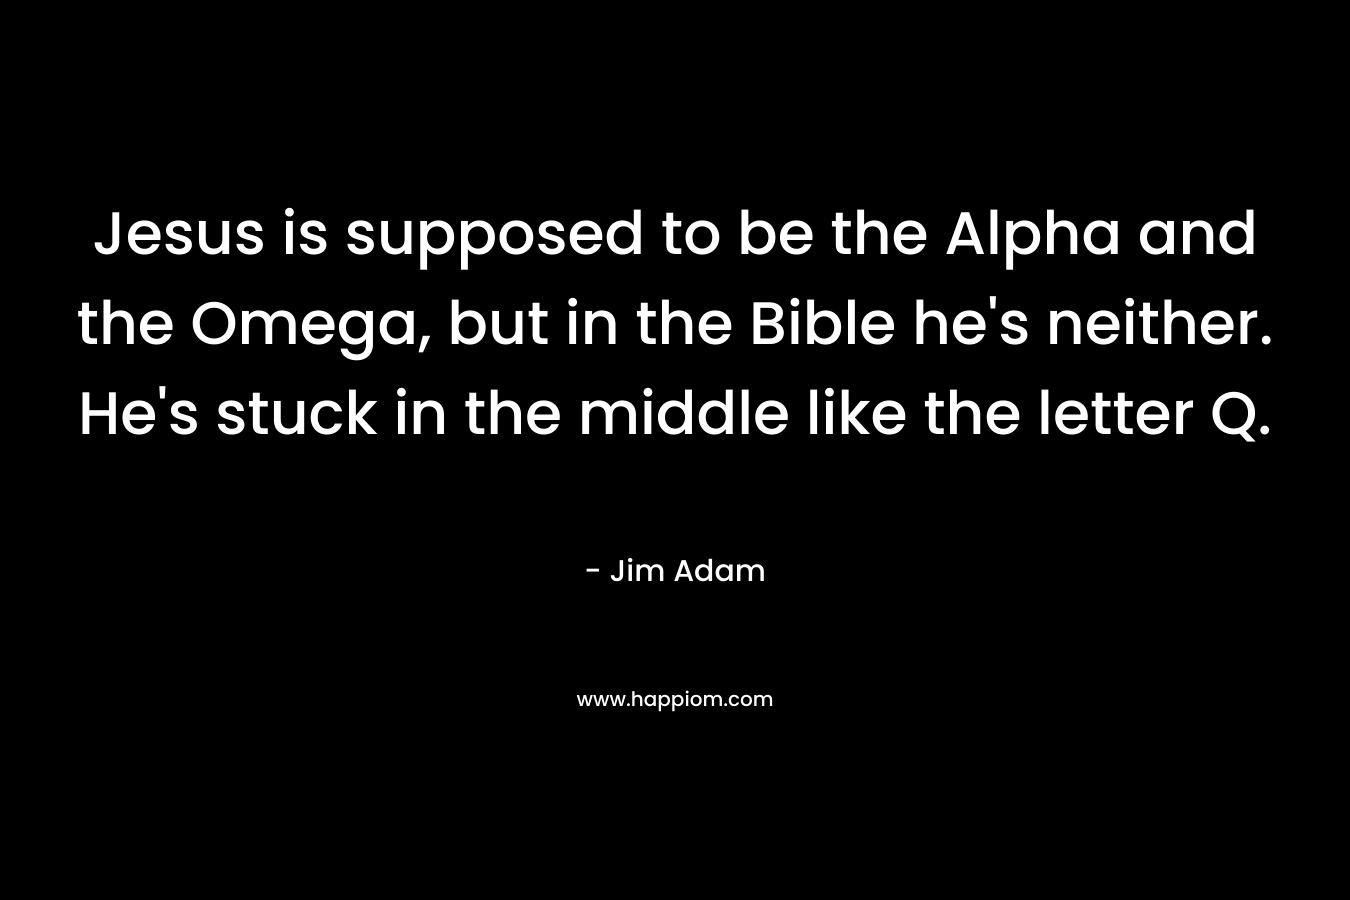 Jesus is supposed to be the Alpha and the Omega, but in the Bible he’s neither. He’s stuck in the middle like the letter Q. – Jim Adam